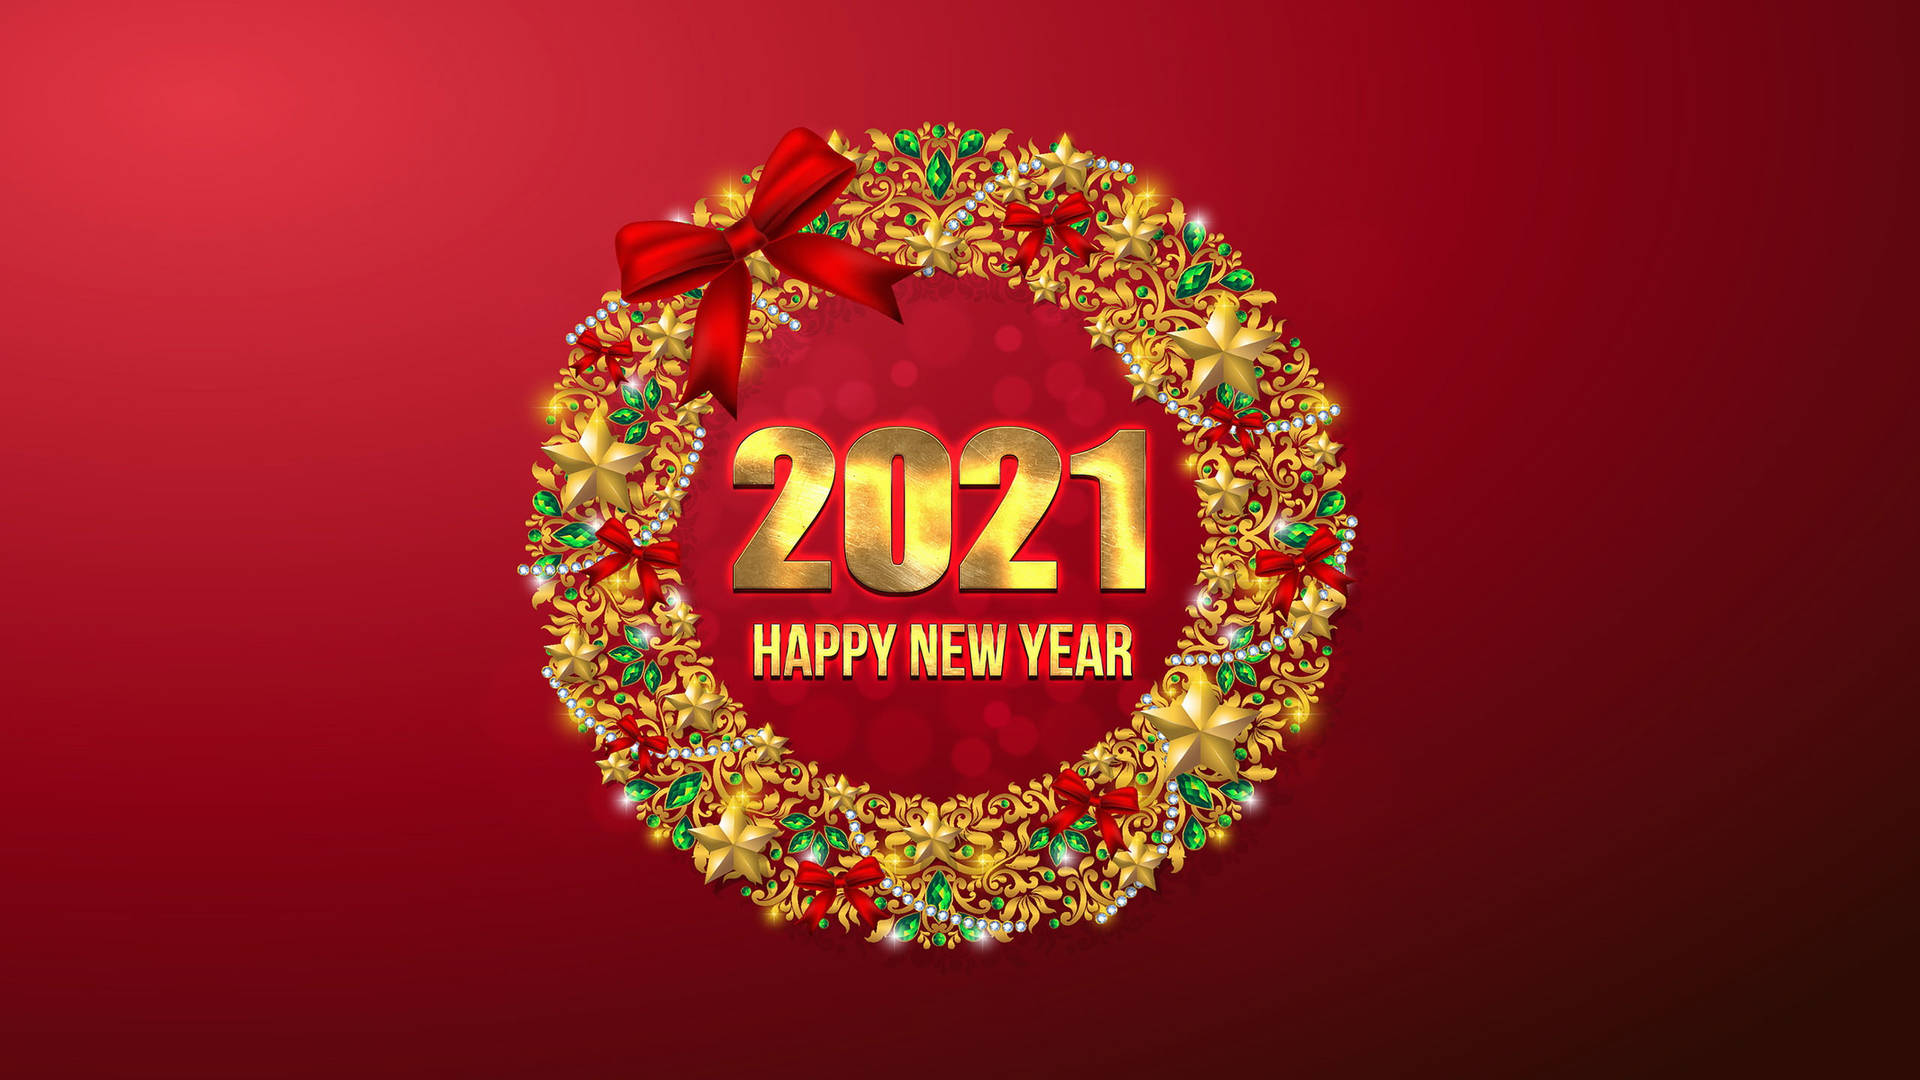 Happy New Year 2021 Greeting With Christmas Garlands Background